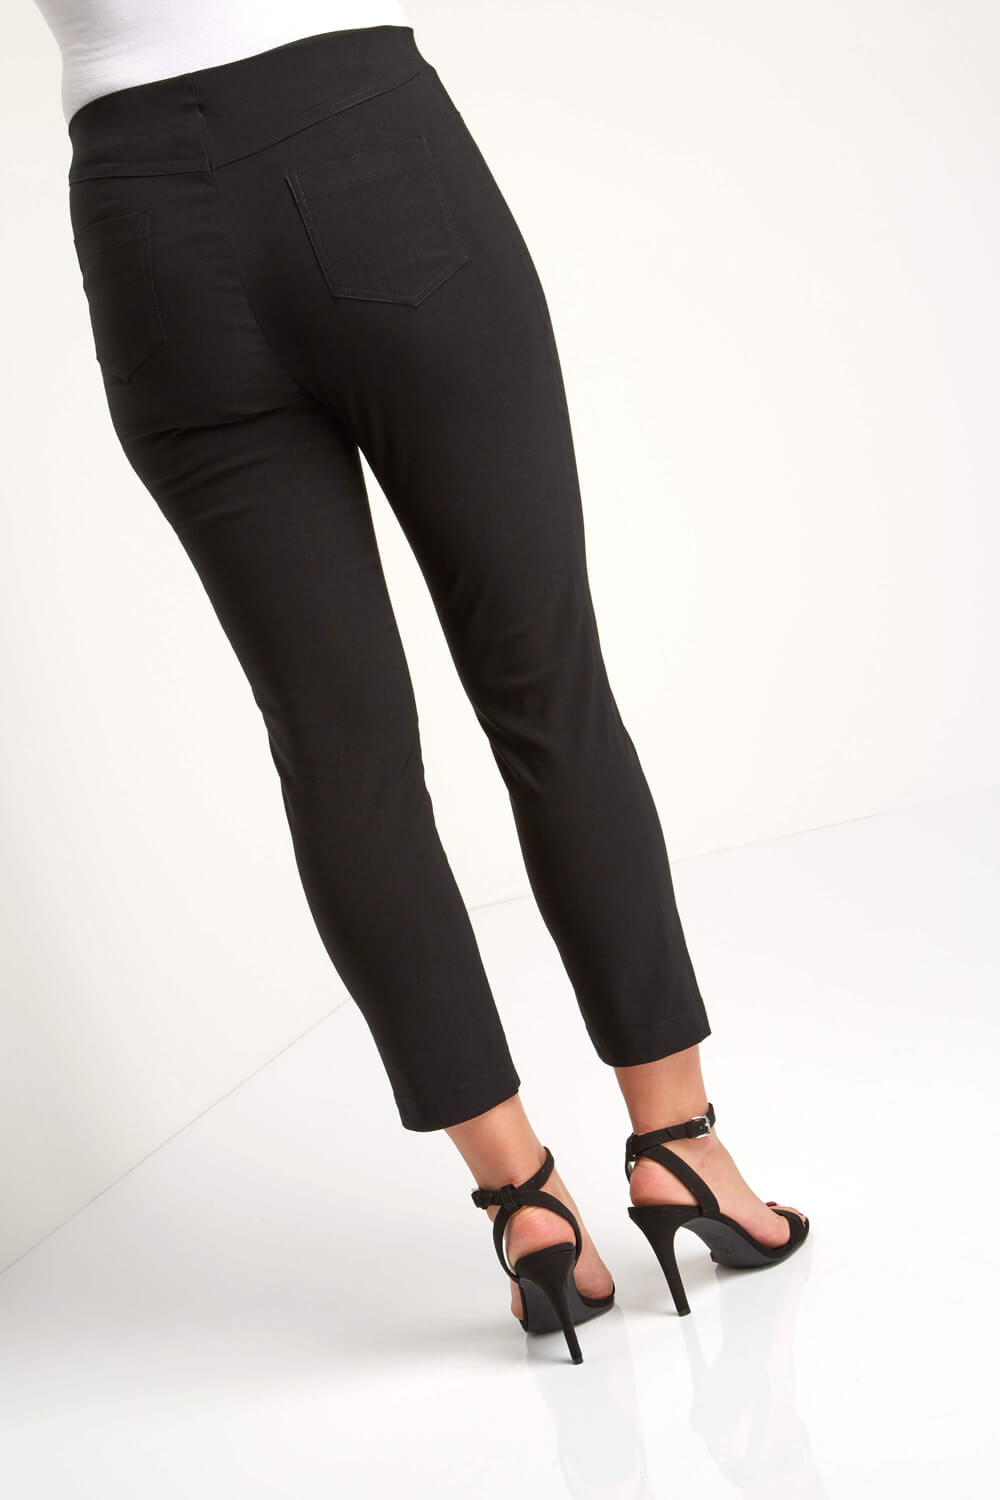 Black 3/4 Length Stretch Trouser, Image 2 of 5